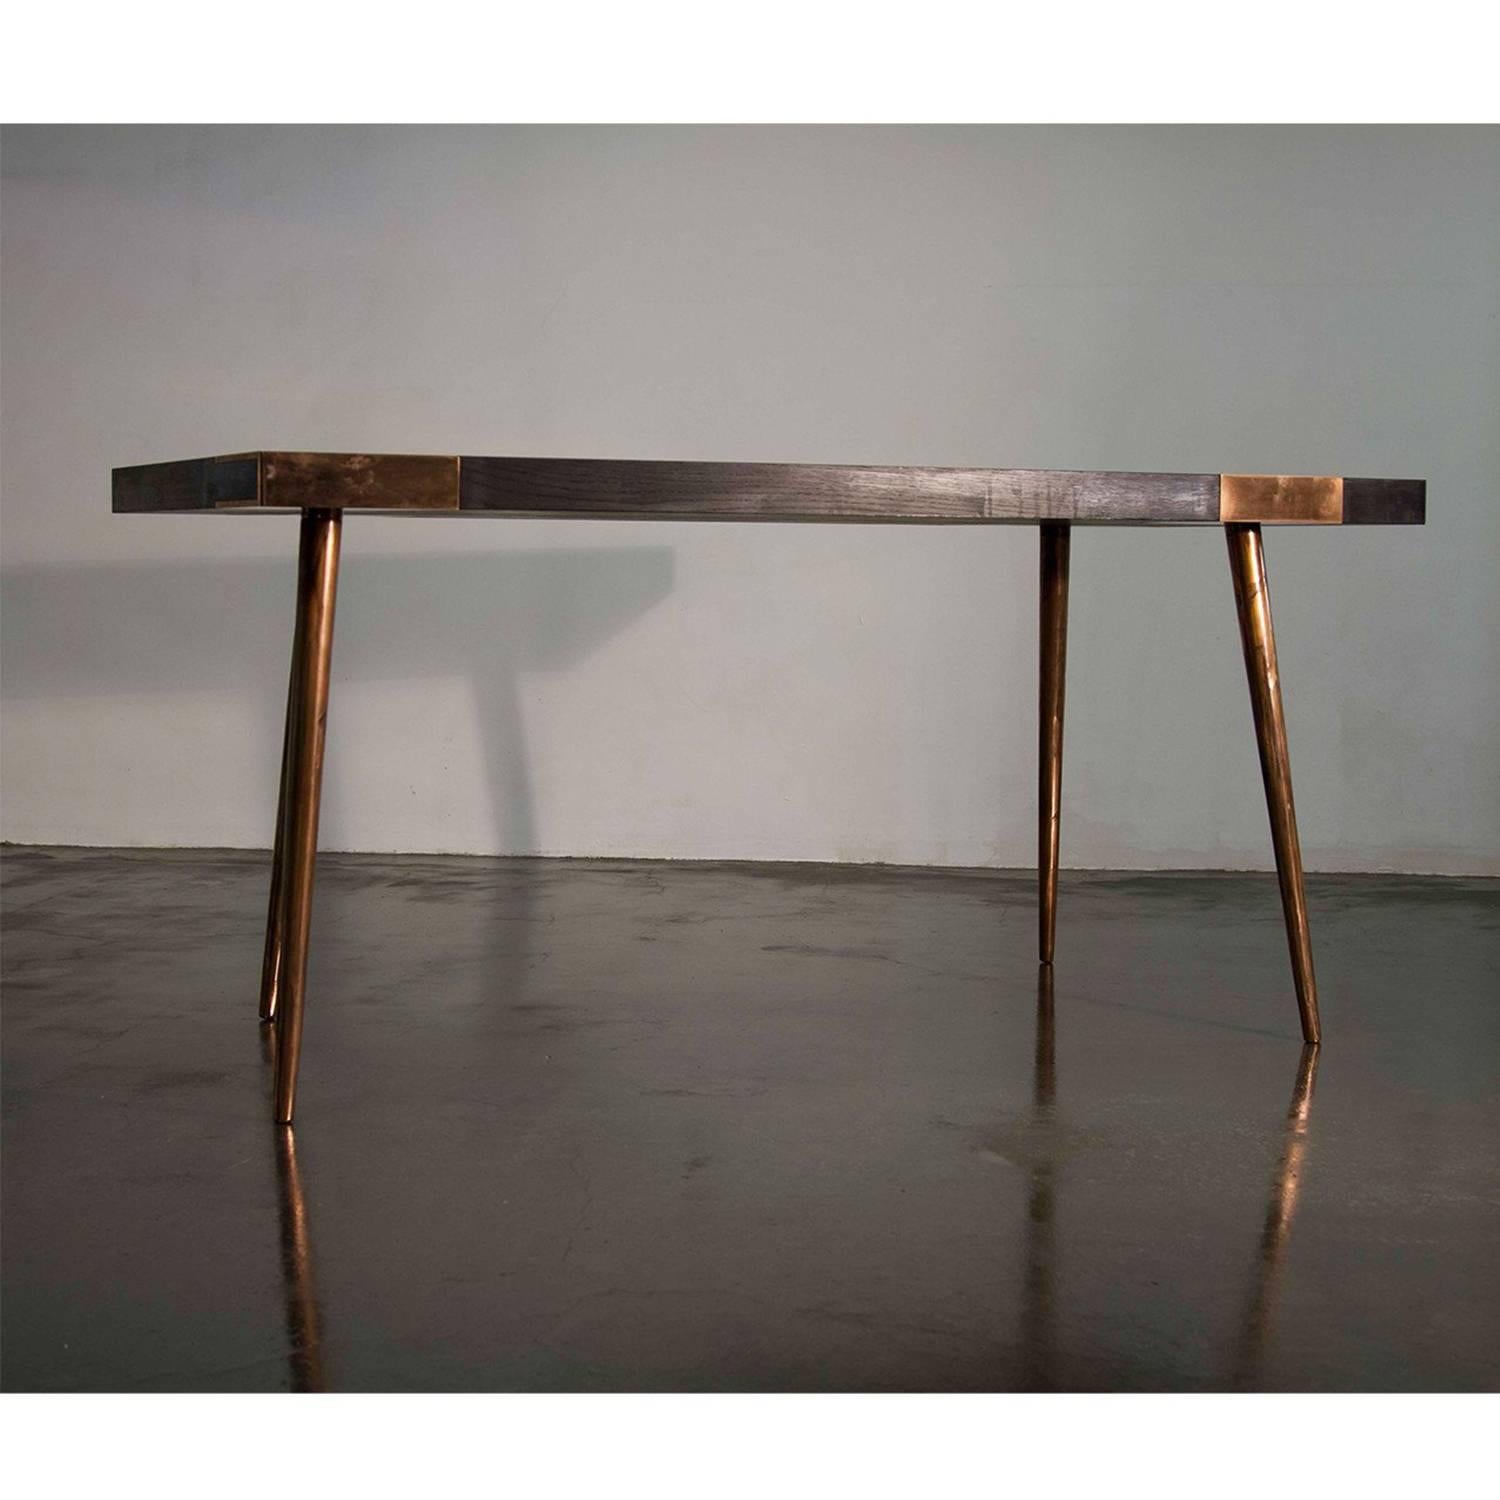 Indigo is a handcrafted stylised walnut or oak veneer and coppered steel or patinated brass finish dining table with classic in-kitchen dining proportions. The table's legs are offered in several finishes - silver plated, brushed brass, polished